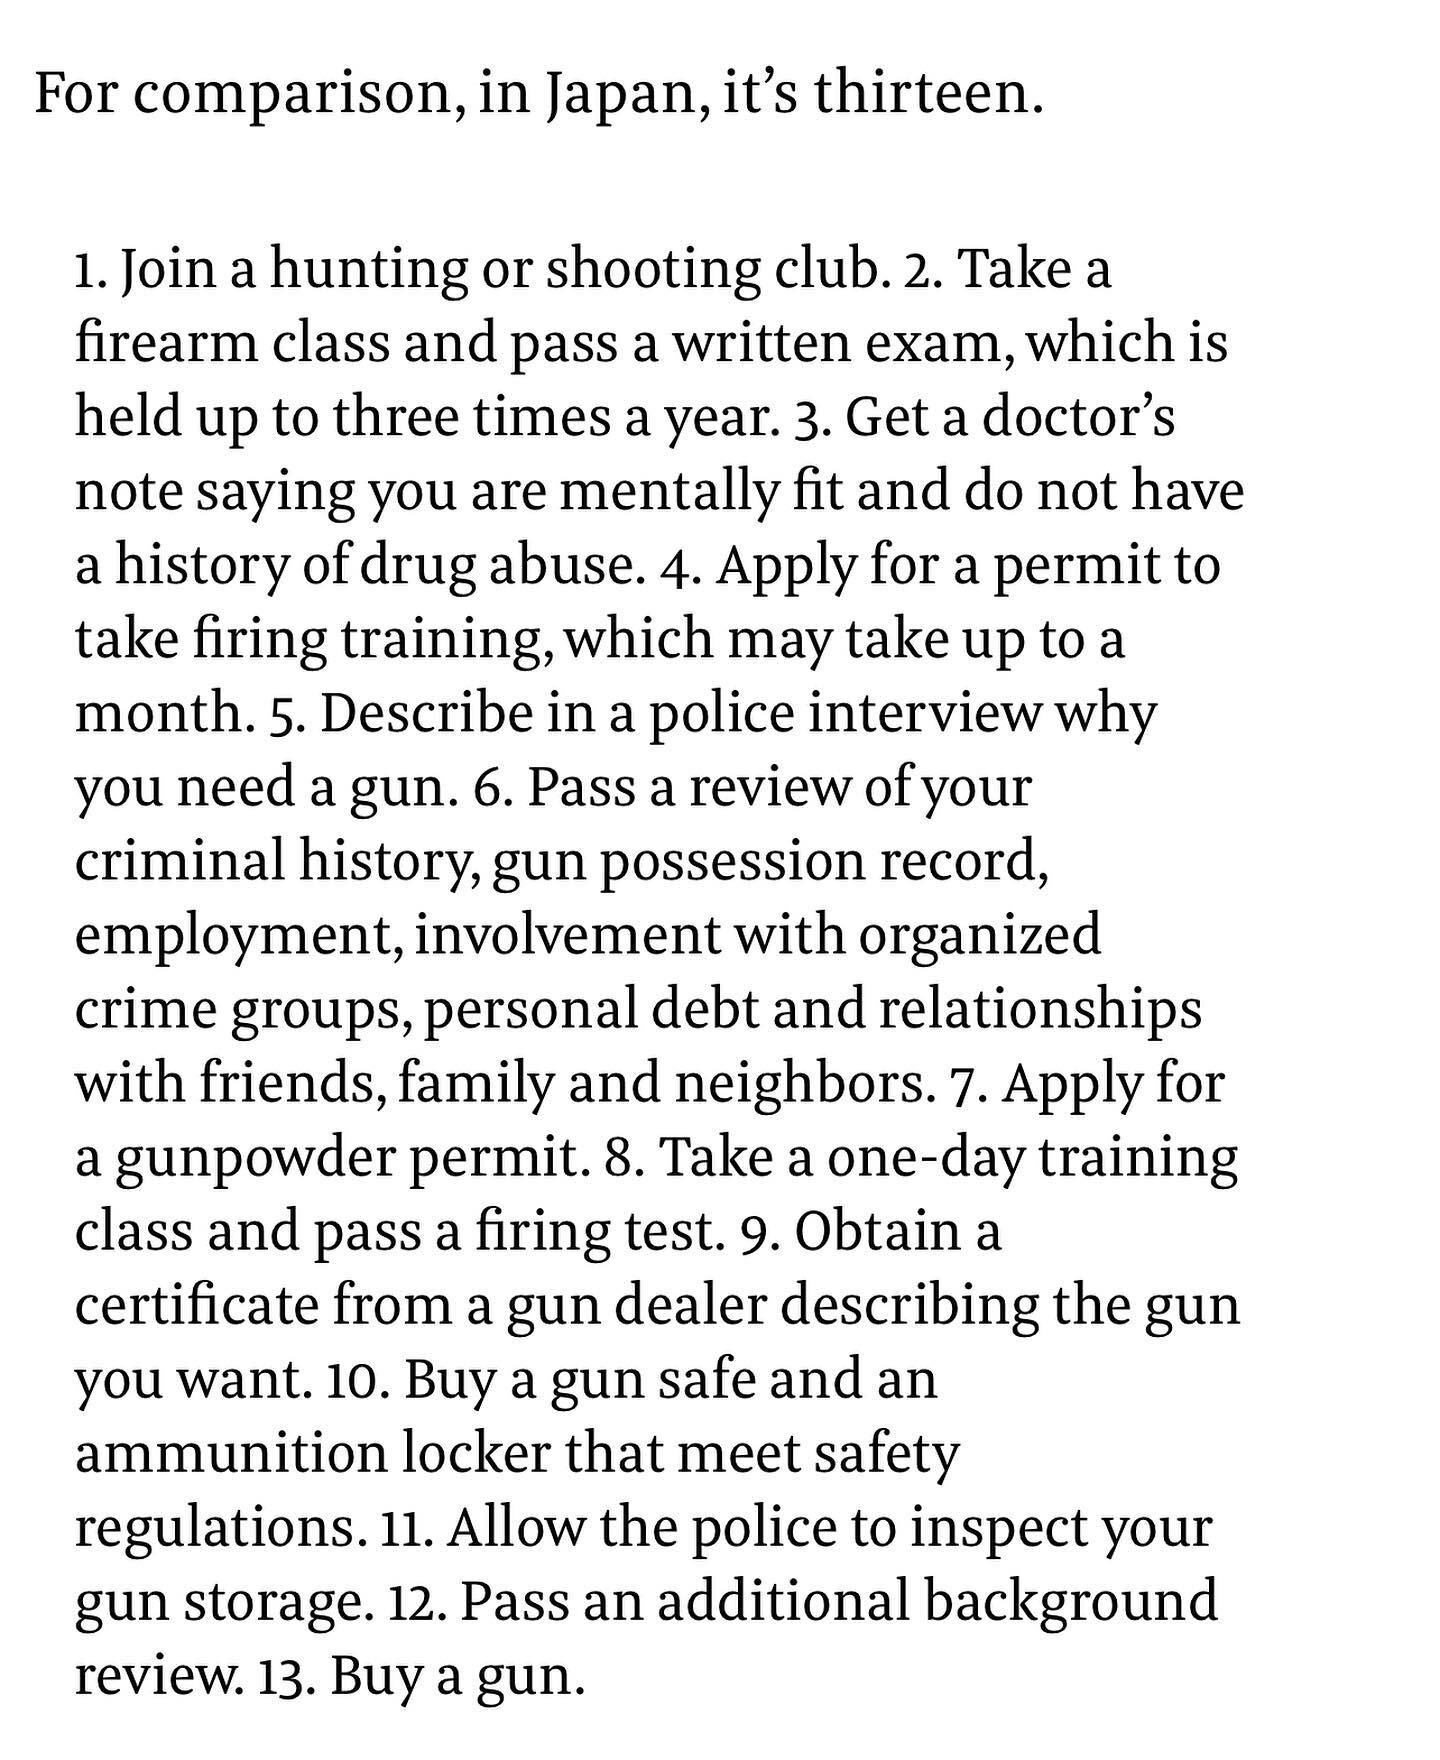 Steps to buying a gun in the US? Two. In Japan? Thirteen. 

https://www.fastcompany.com/90162749/its-absurdly-easy-to-buy-a-gun-in-america